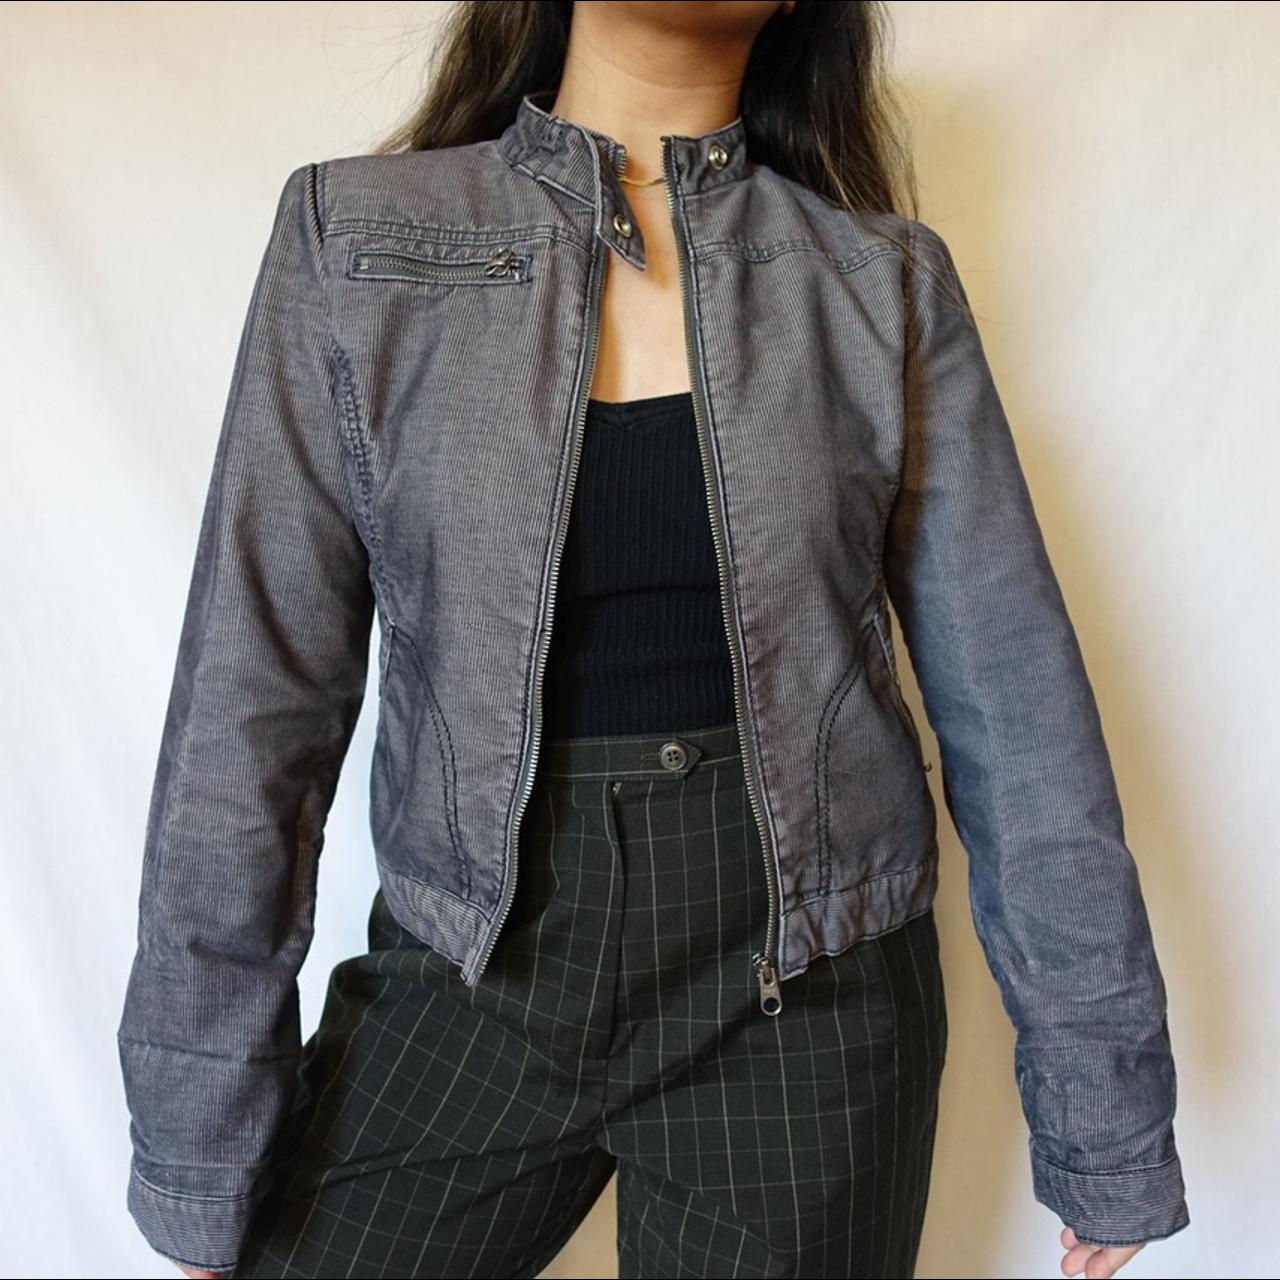 American Vintage Women's Grey and Silver Jacket